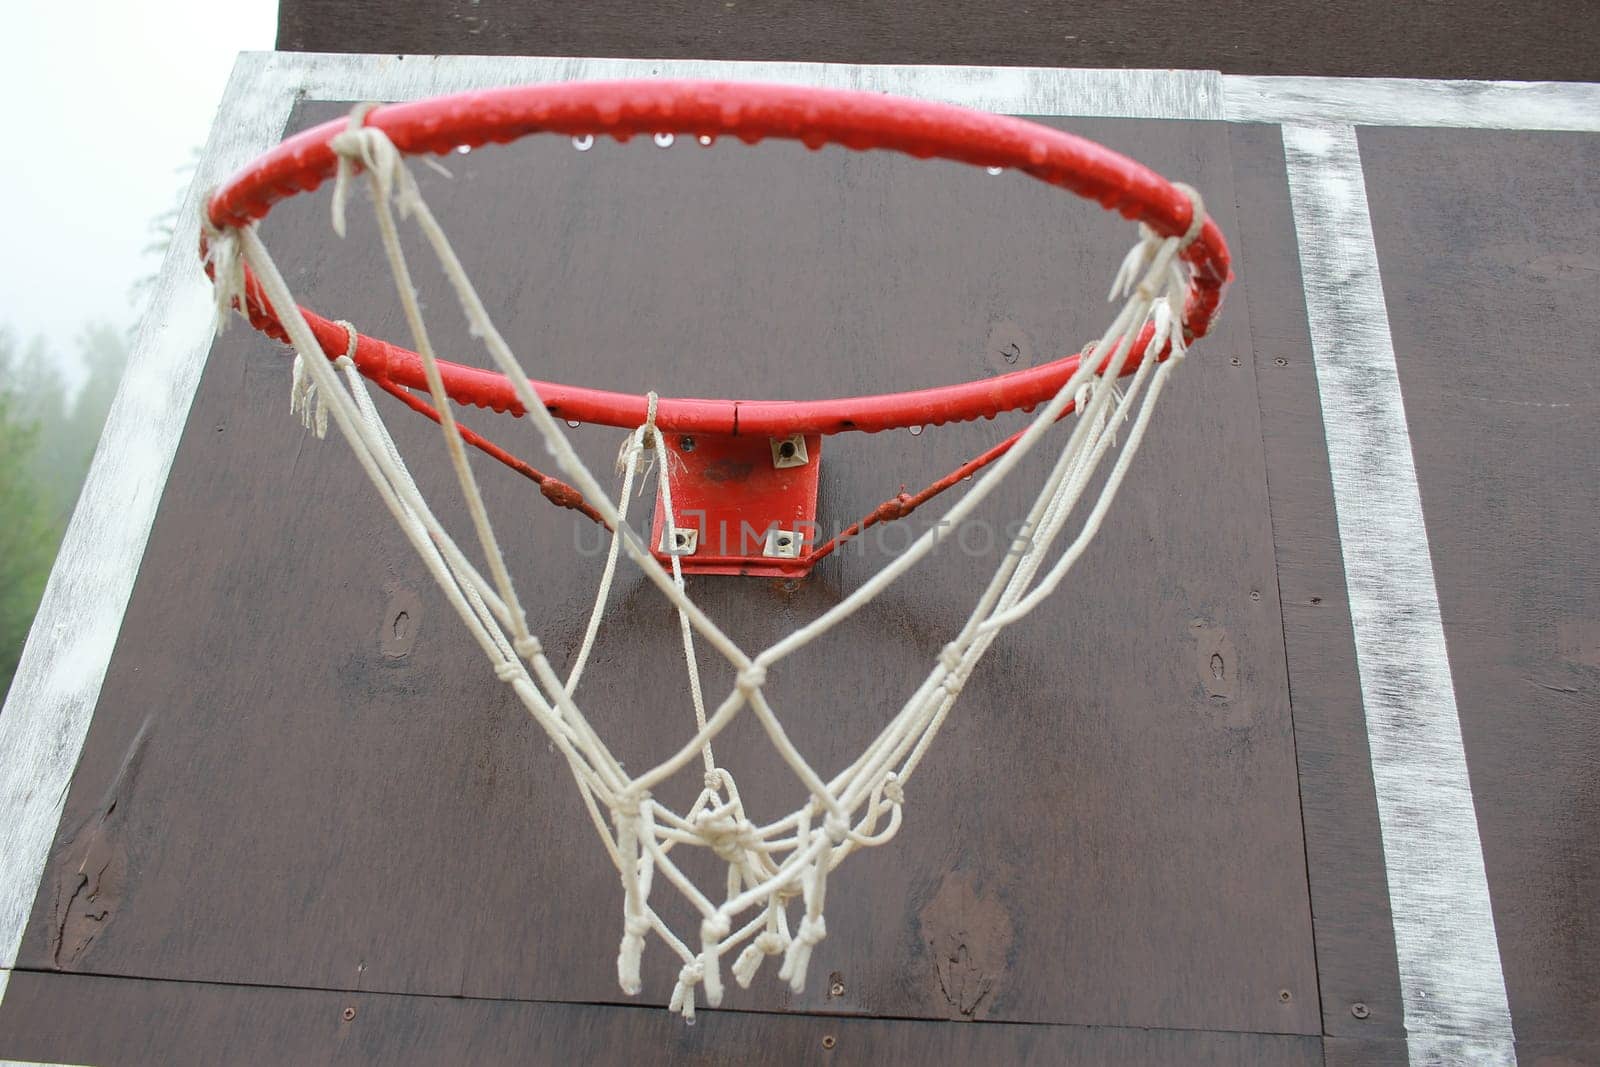 Photo a wet basketball hoop with a net after the rain. Outdoor games. Sports equipment.